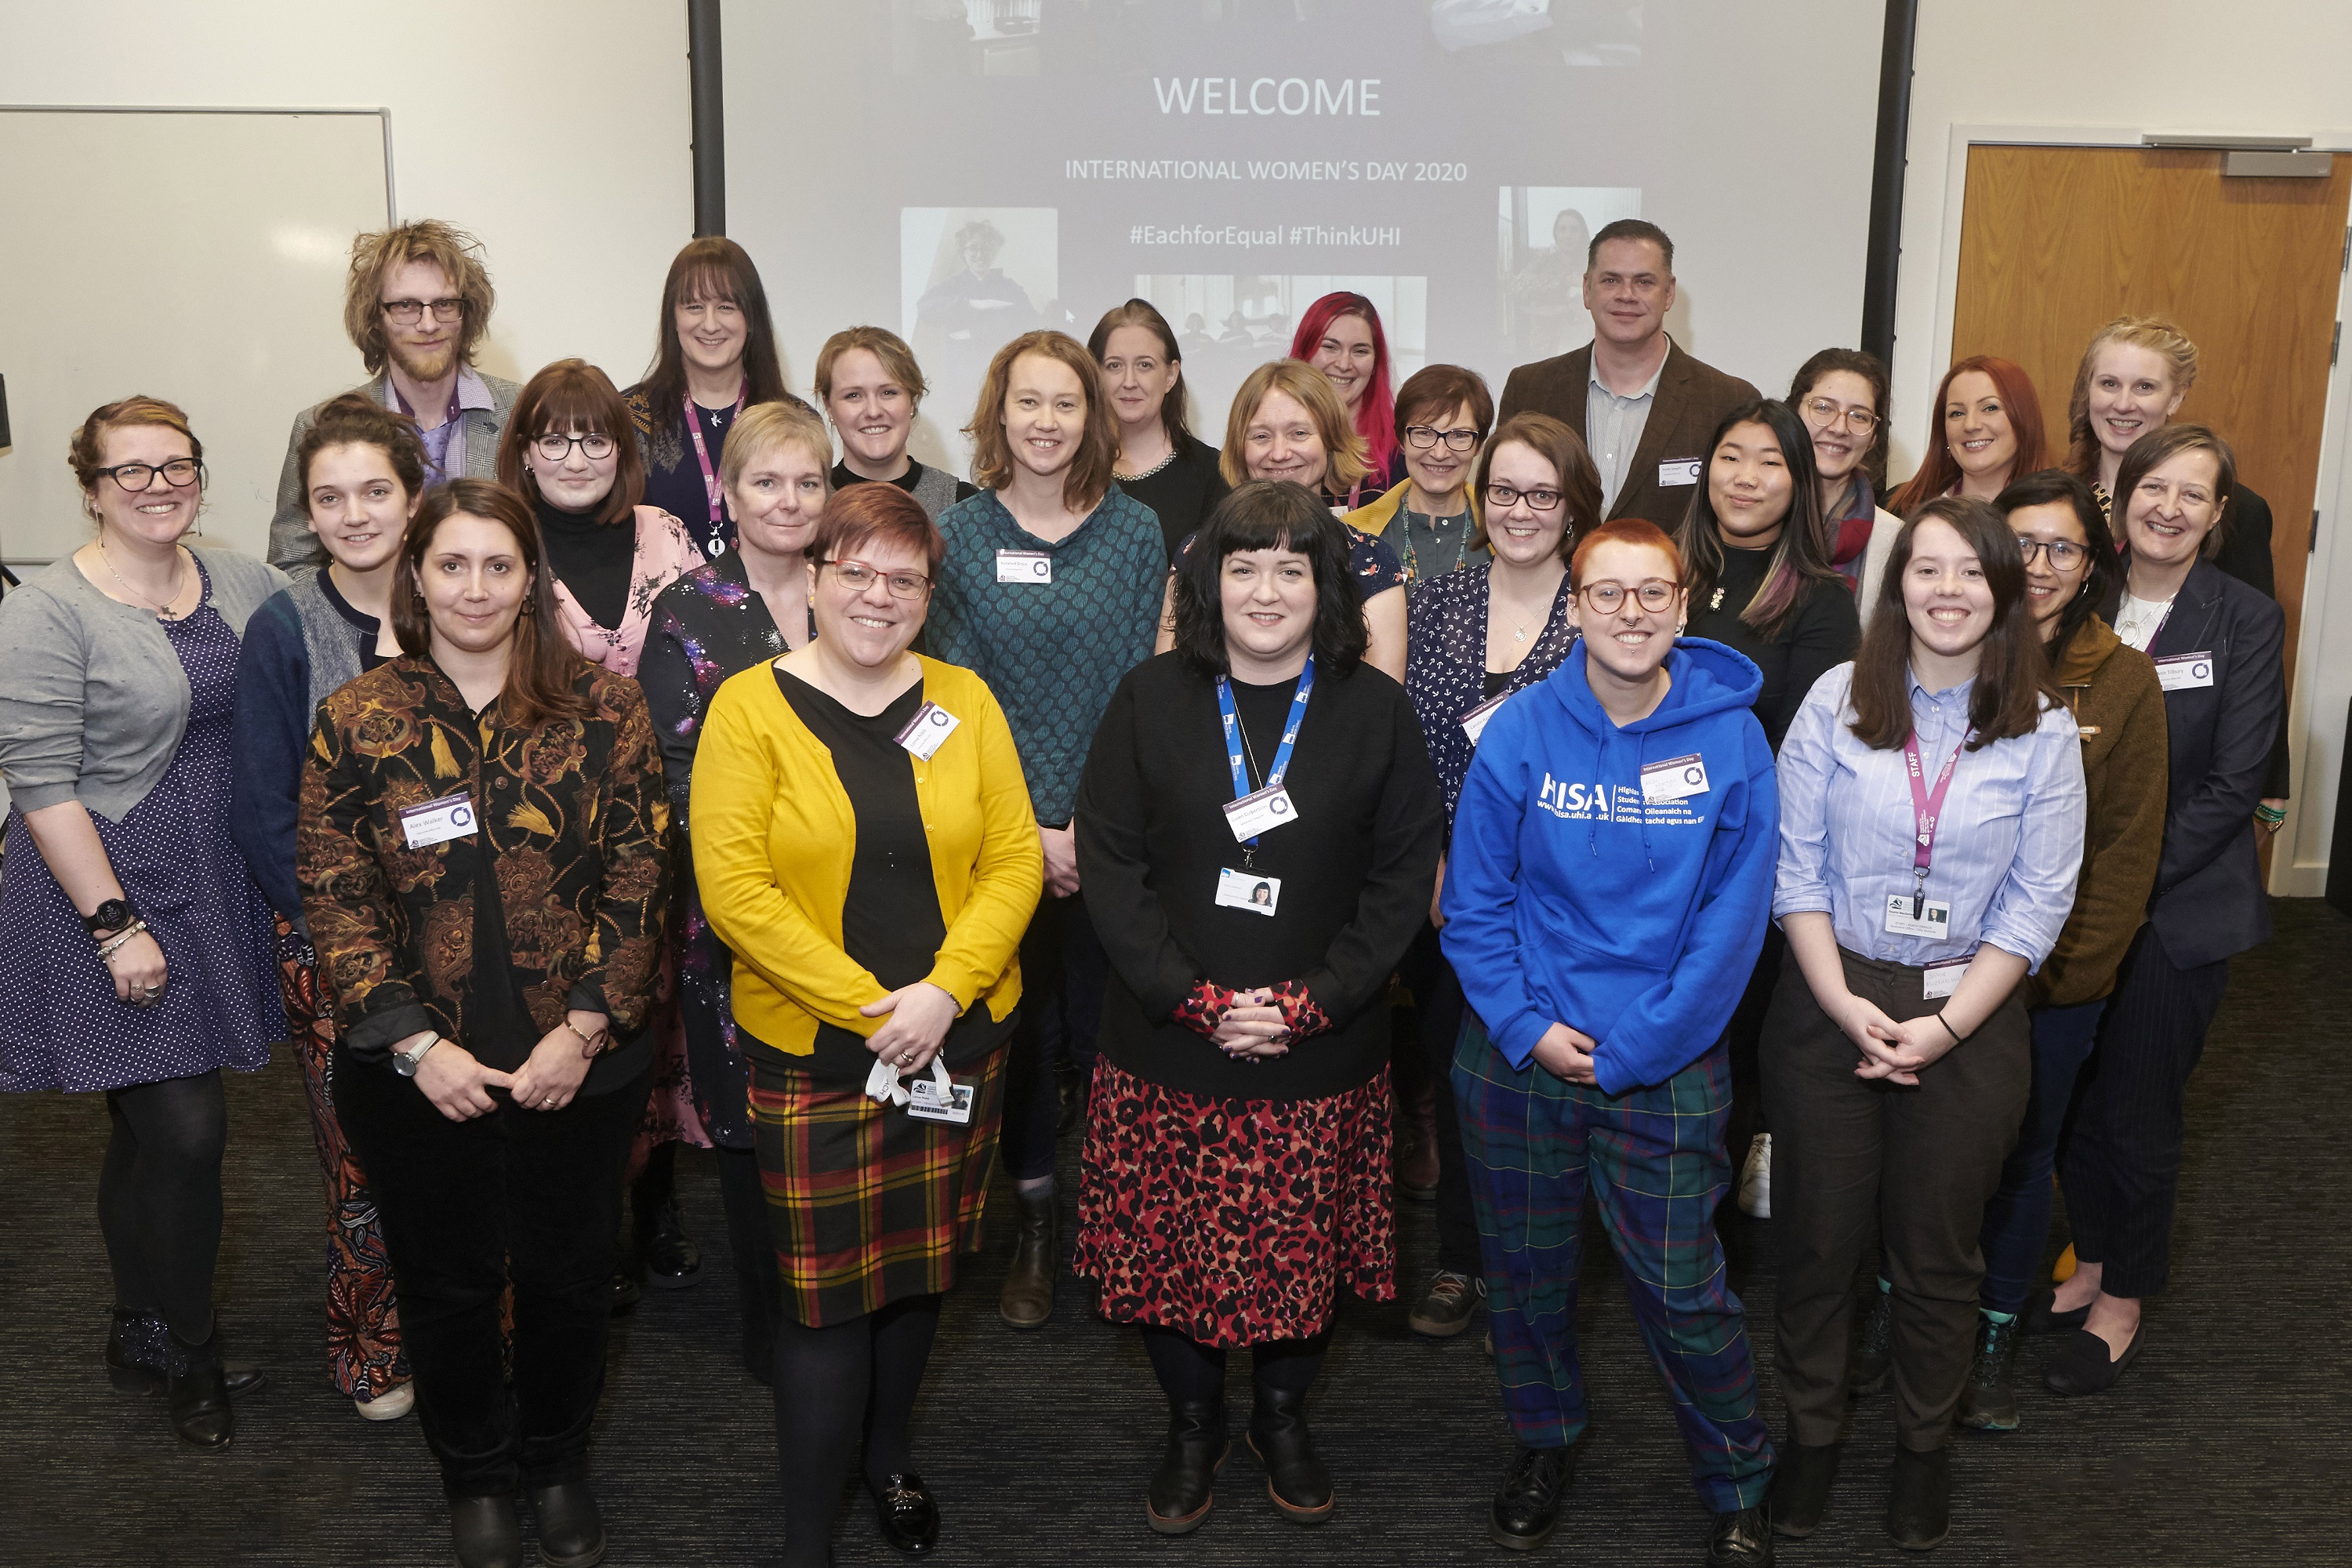 Woman leaders inspire and celebrate at International Women’s Day event